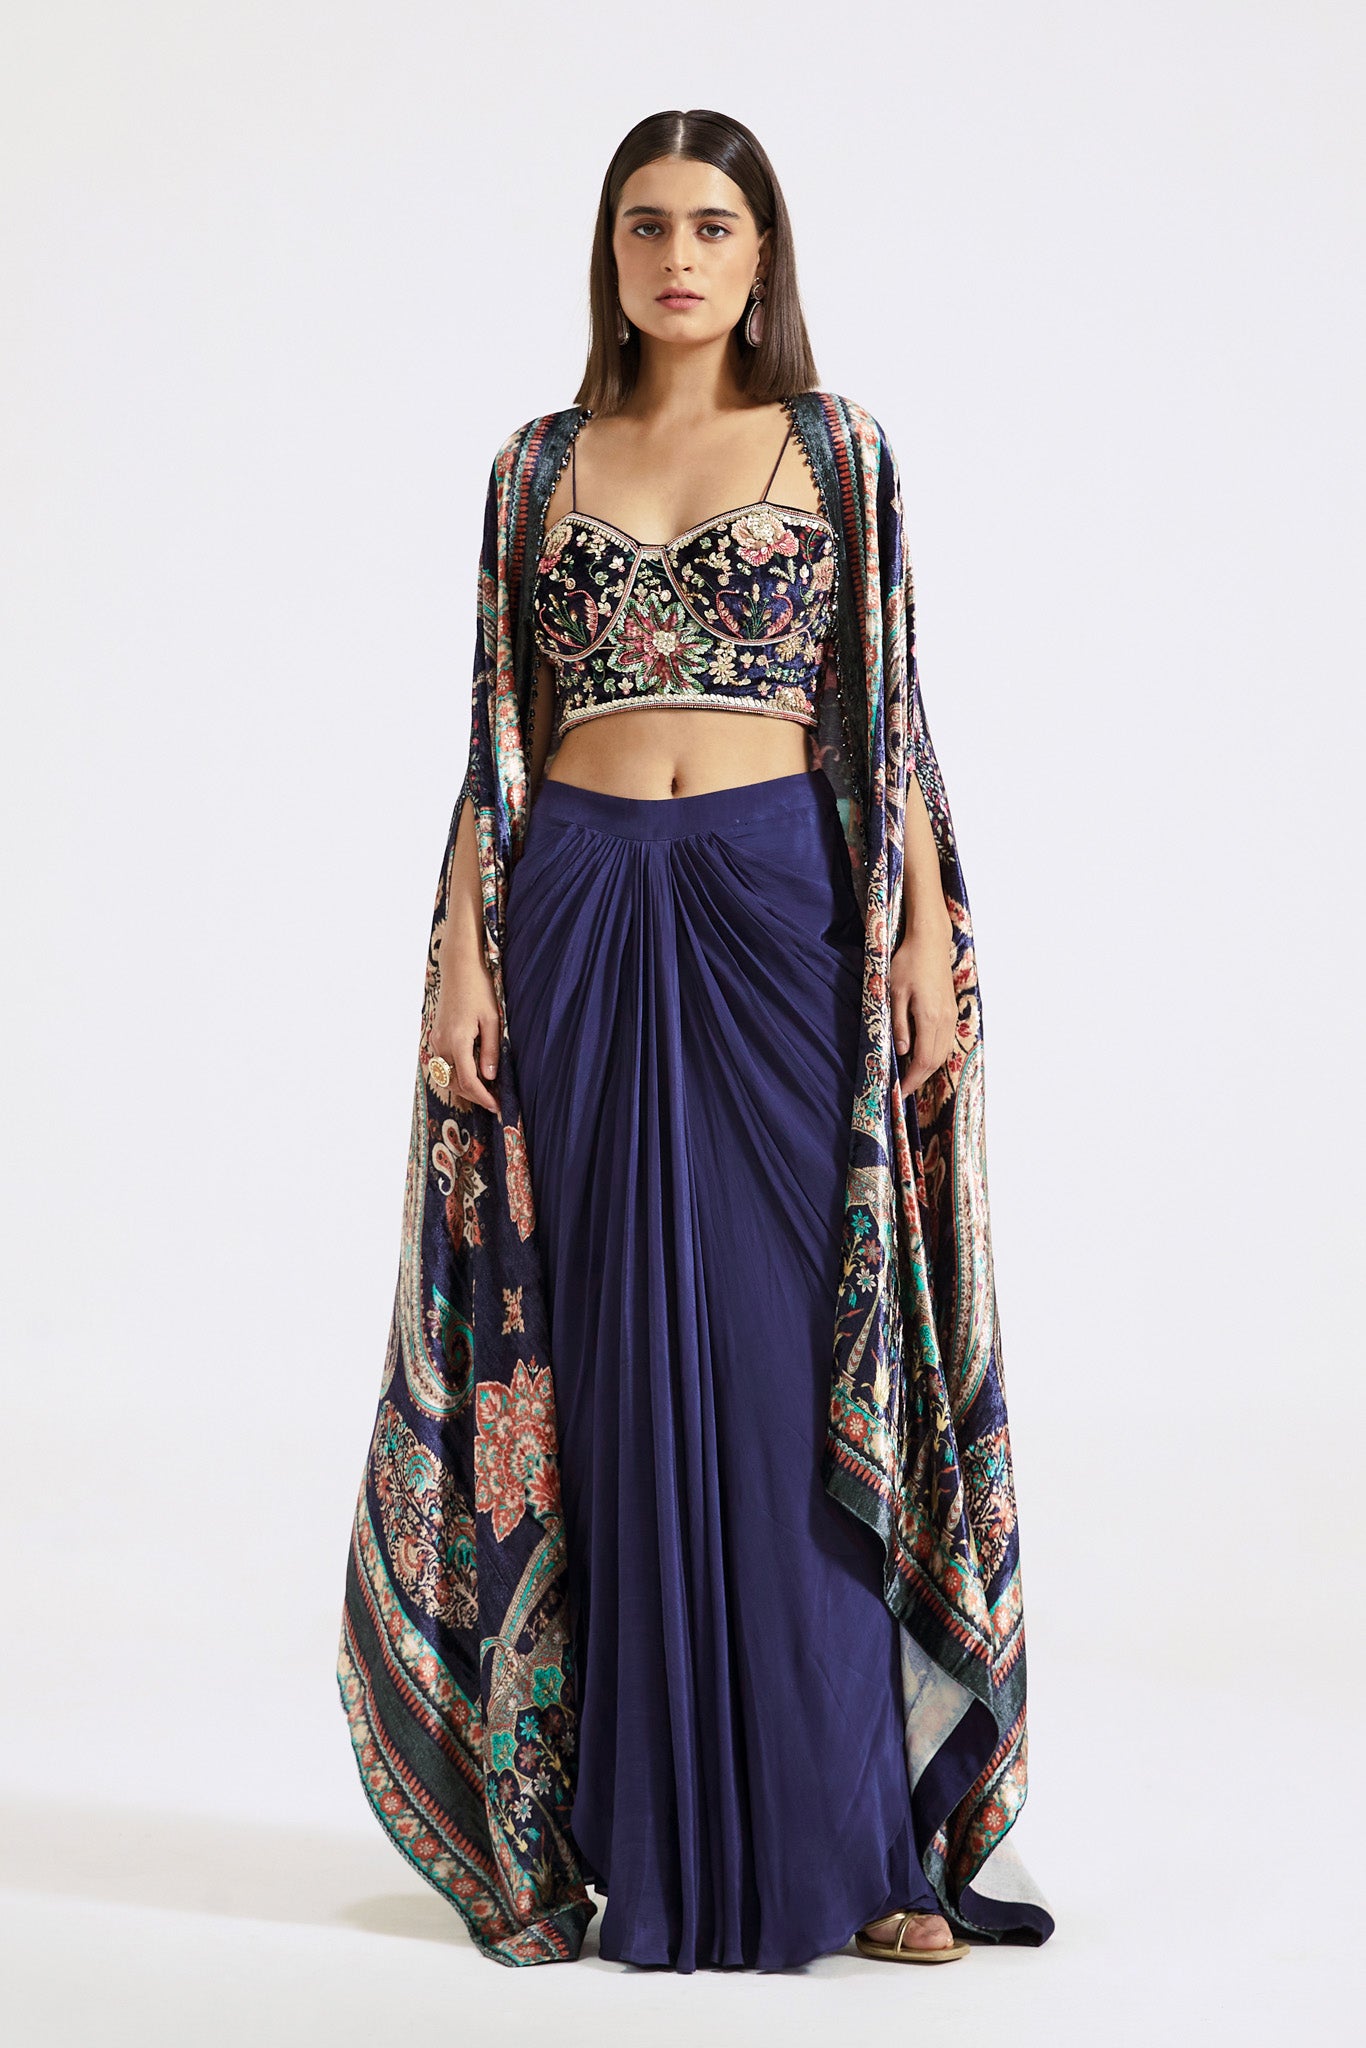 Buy blue velvet and crepe draped skirt set online in USA with printed cape. Shop the best and latest designs in embroidered sarees, designer sarees, Anarkali suit, lehengas, sharara suits for weddings and special occasions from Pure Elegance Indian fashion store in USA.-full view